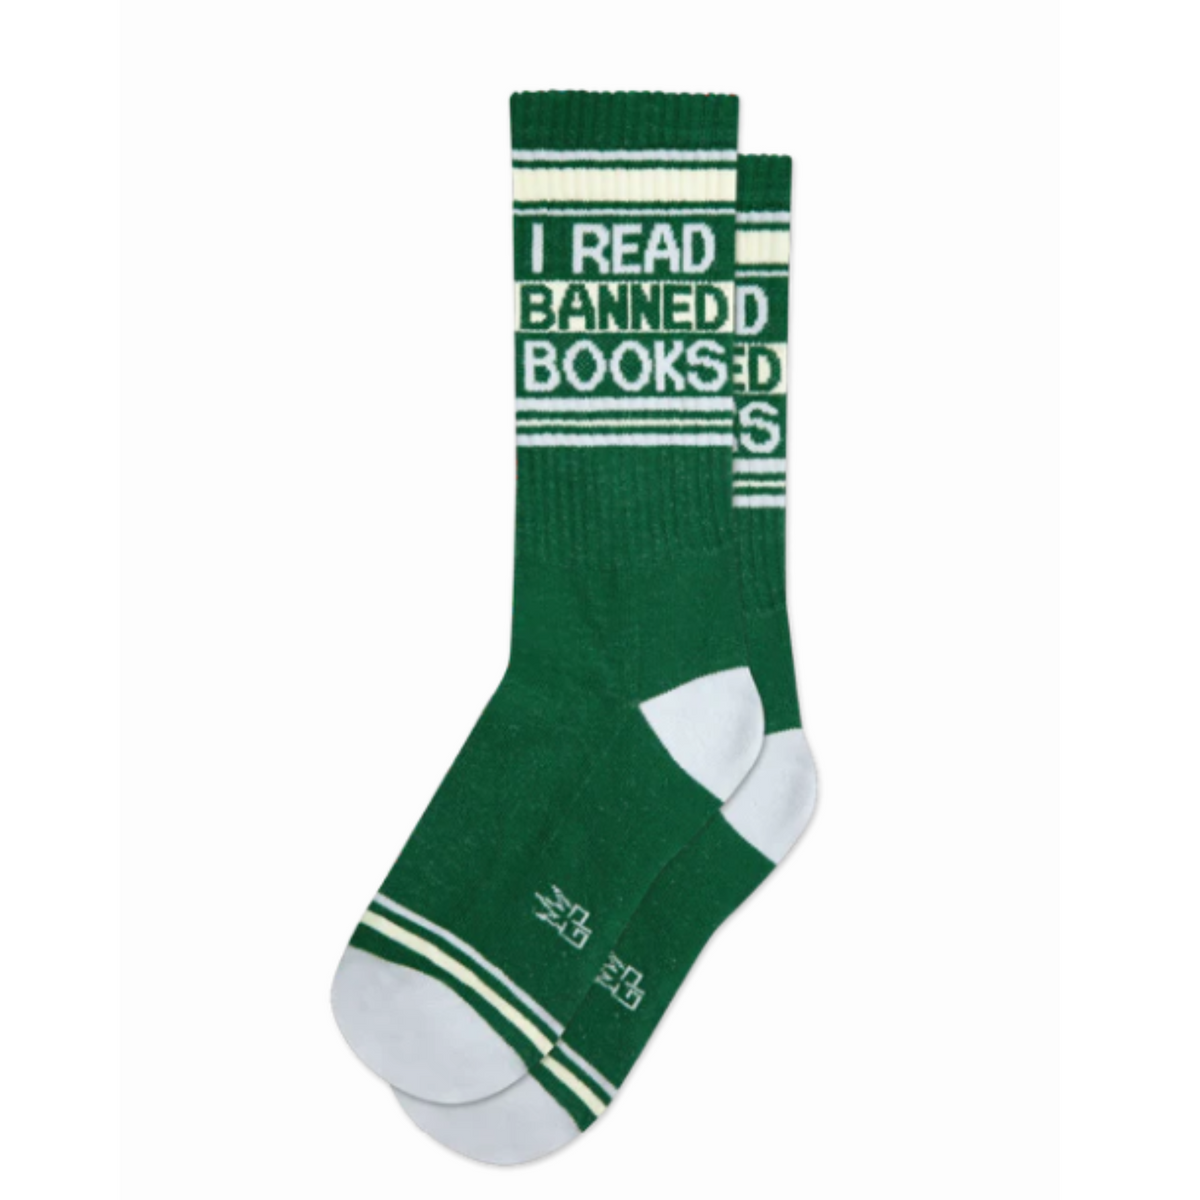 Gumball Poodle I Read Banned Books women&#39;s and men&#39;s crew sock featuring green sock with &quot;I Read Banned Books&quot; at top. Socks shown flat from side. 